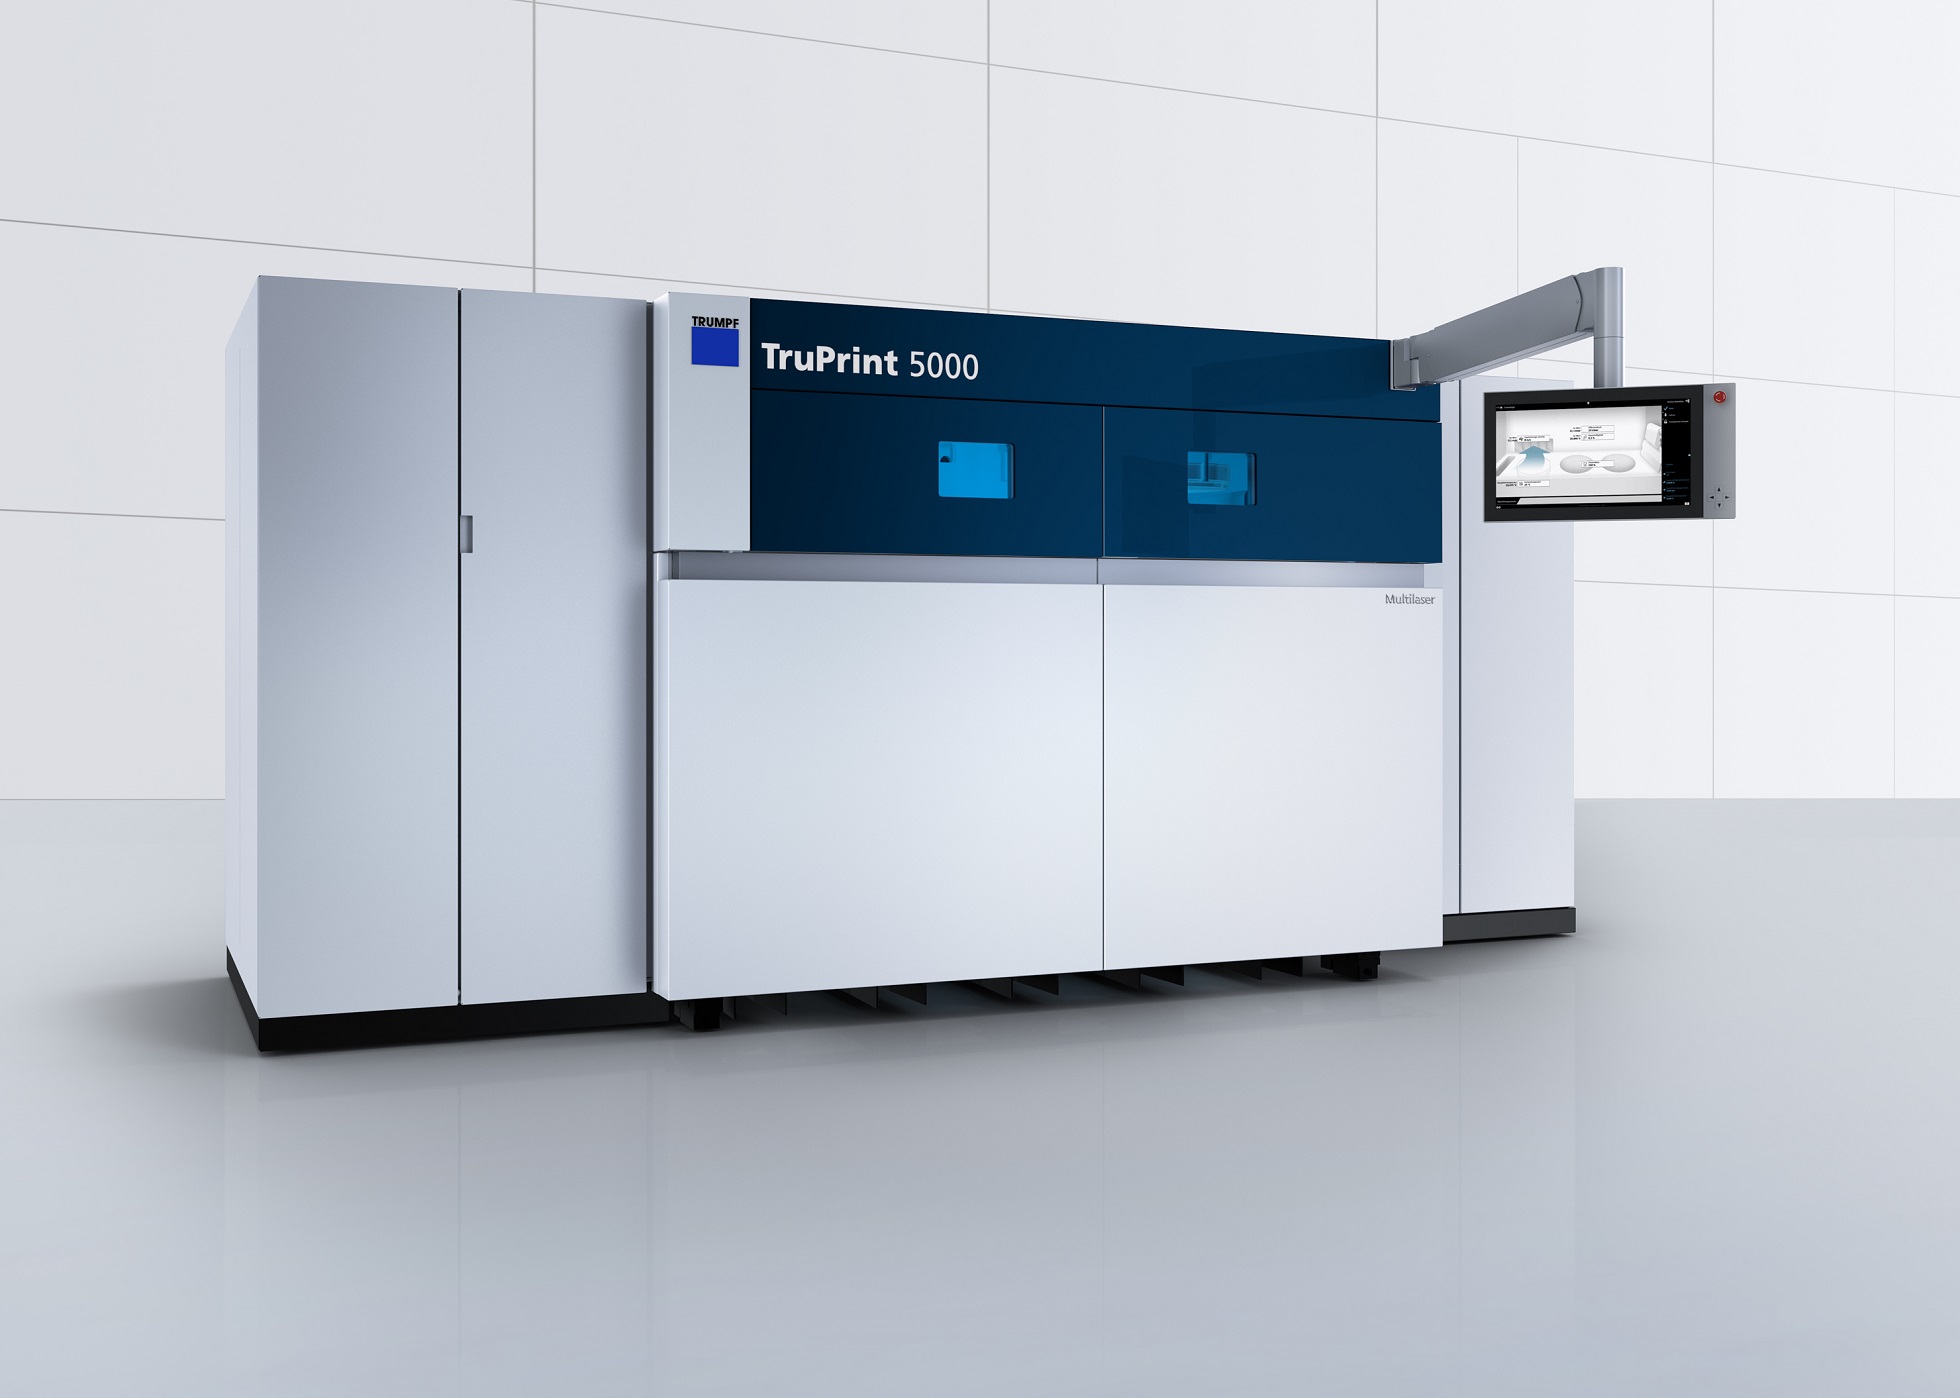 TRUMPF presents fastest 3D printer the world and seeks to become market leader